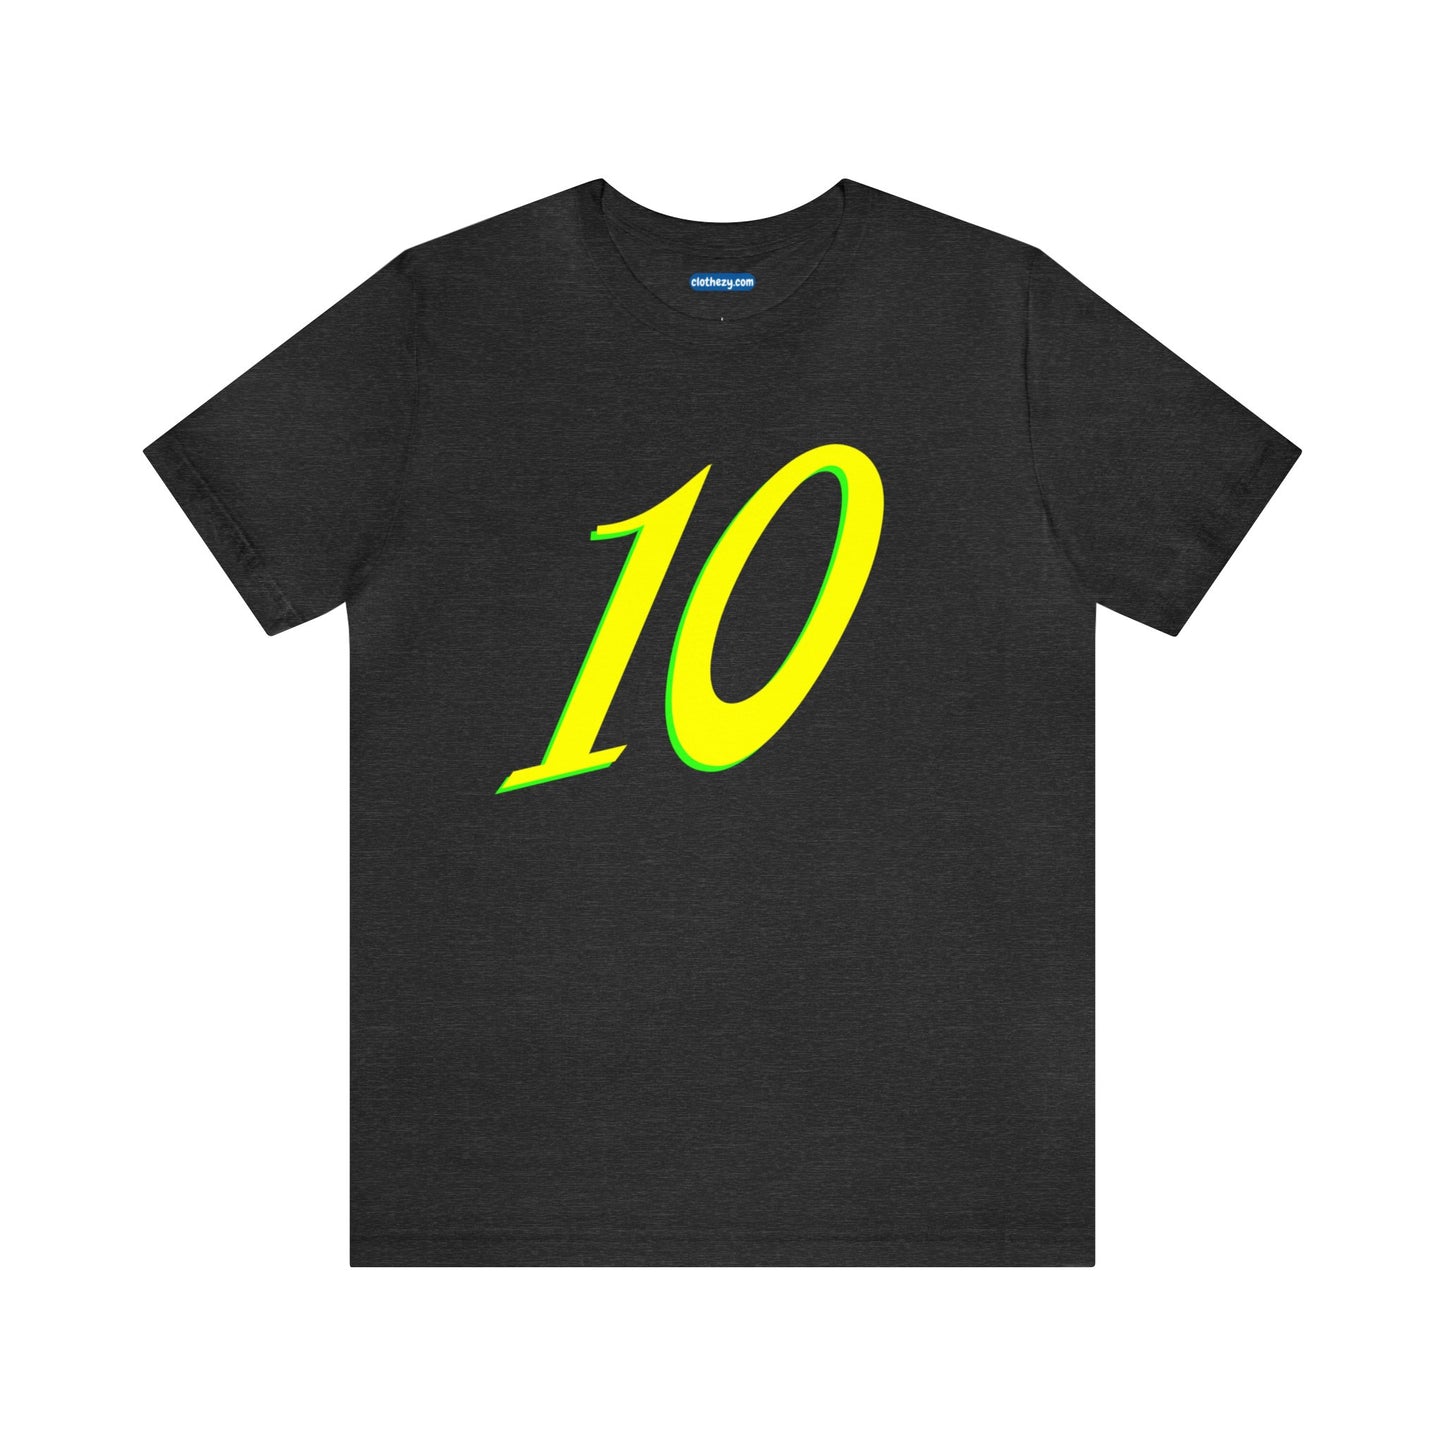 Number 10 Design - Soft Cotton Tee for birthdays and celebrations, Gift for friends and family, Multiple Options by clothezy.com in Dark Grey Heather Size Small - Buy Now